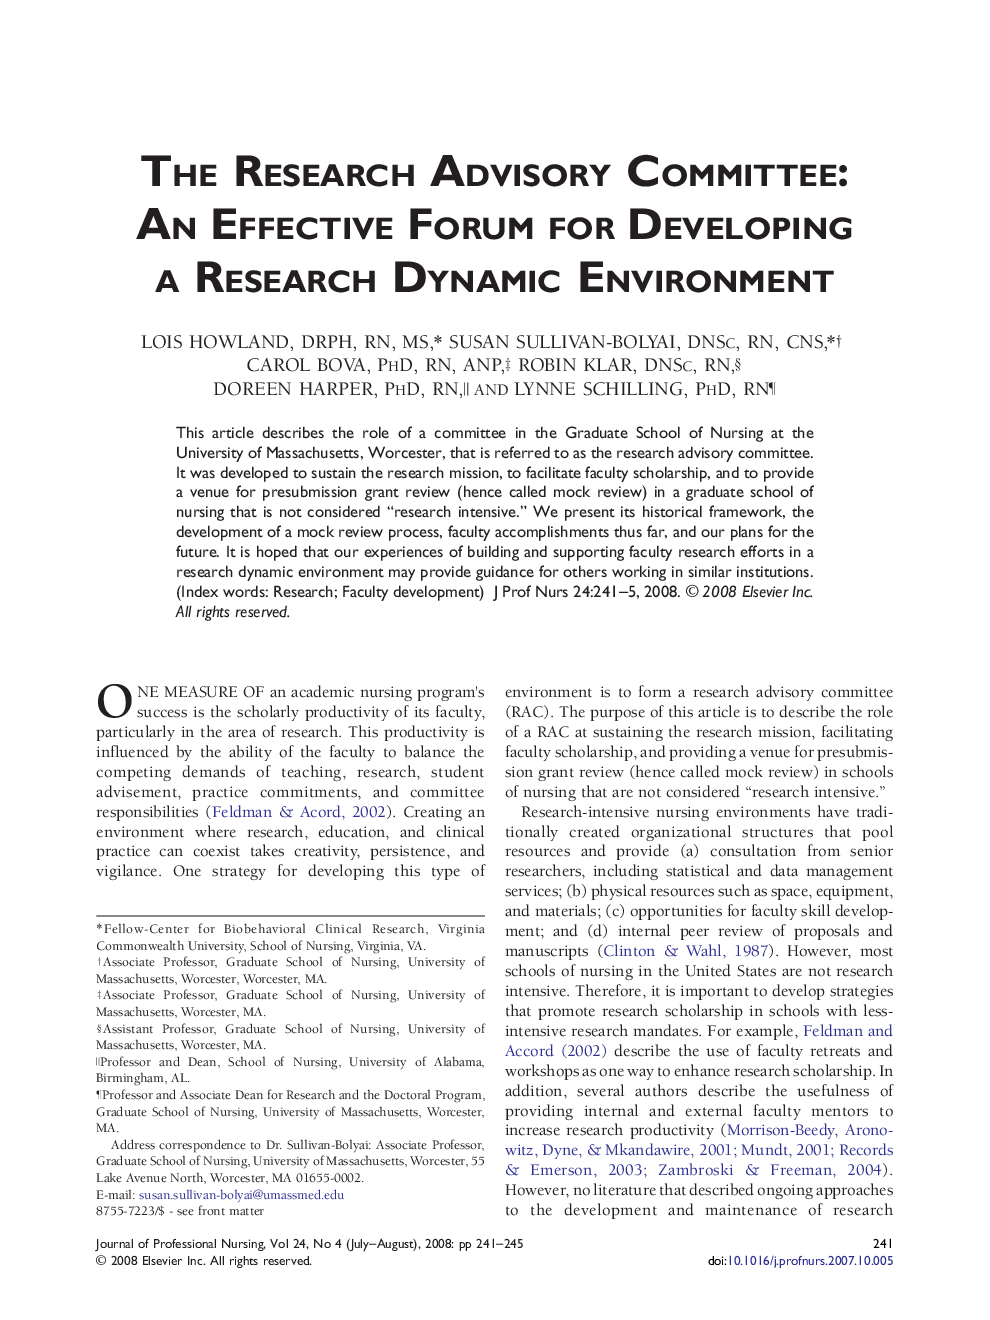 The Research Advisory Committee: An Effective Forum for Developing a Research Dynamic Environment